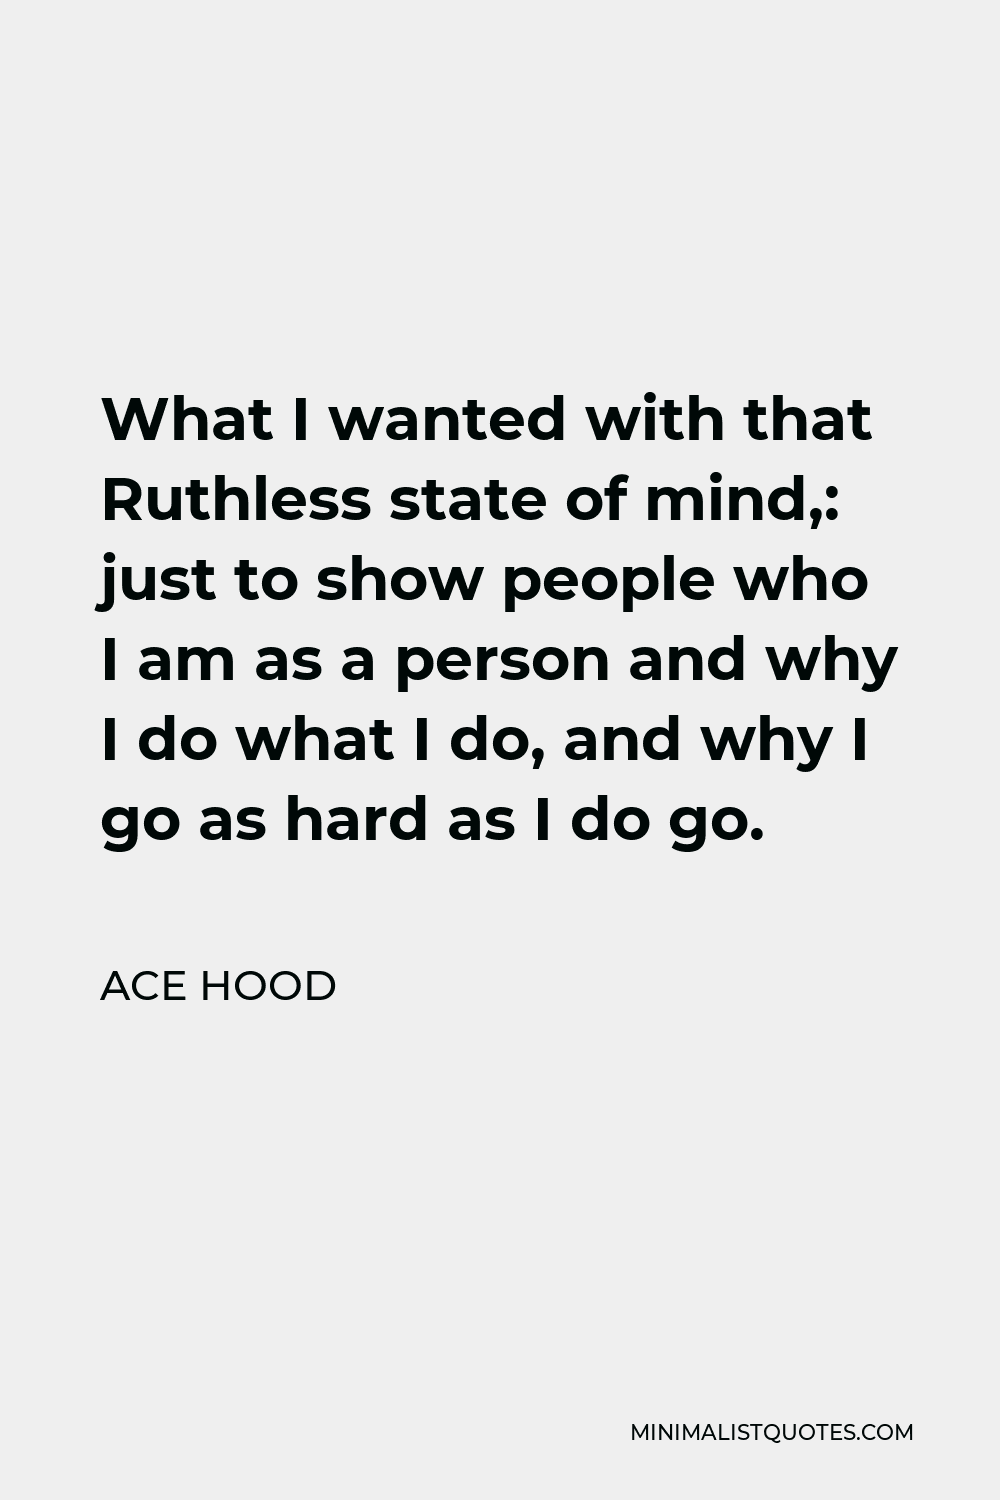 Ace Hood Quote - What I wanted with that Ruthless state of mind,: just to show people who I am as a person and why I do what I do, and why I go as hard as I do go.